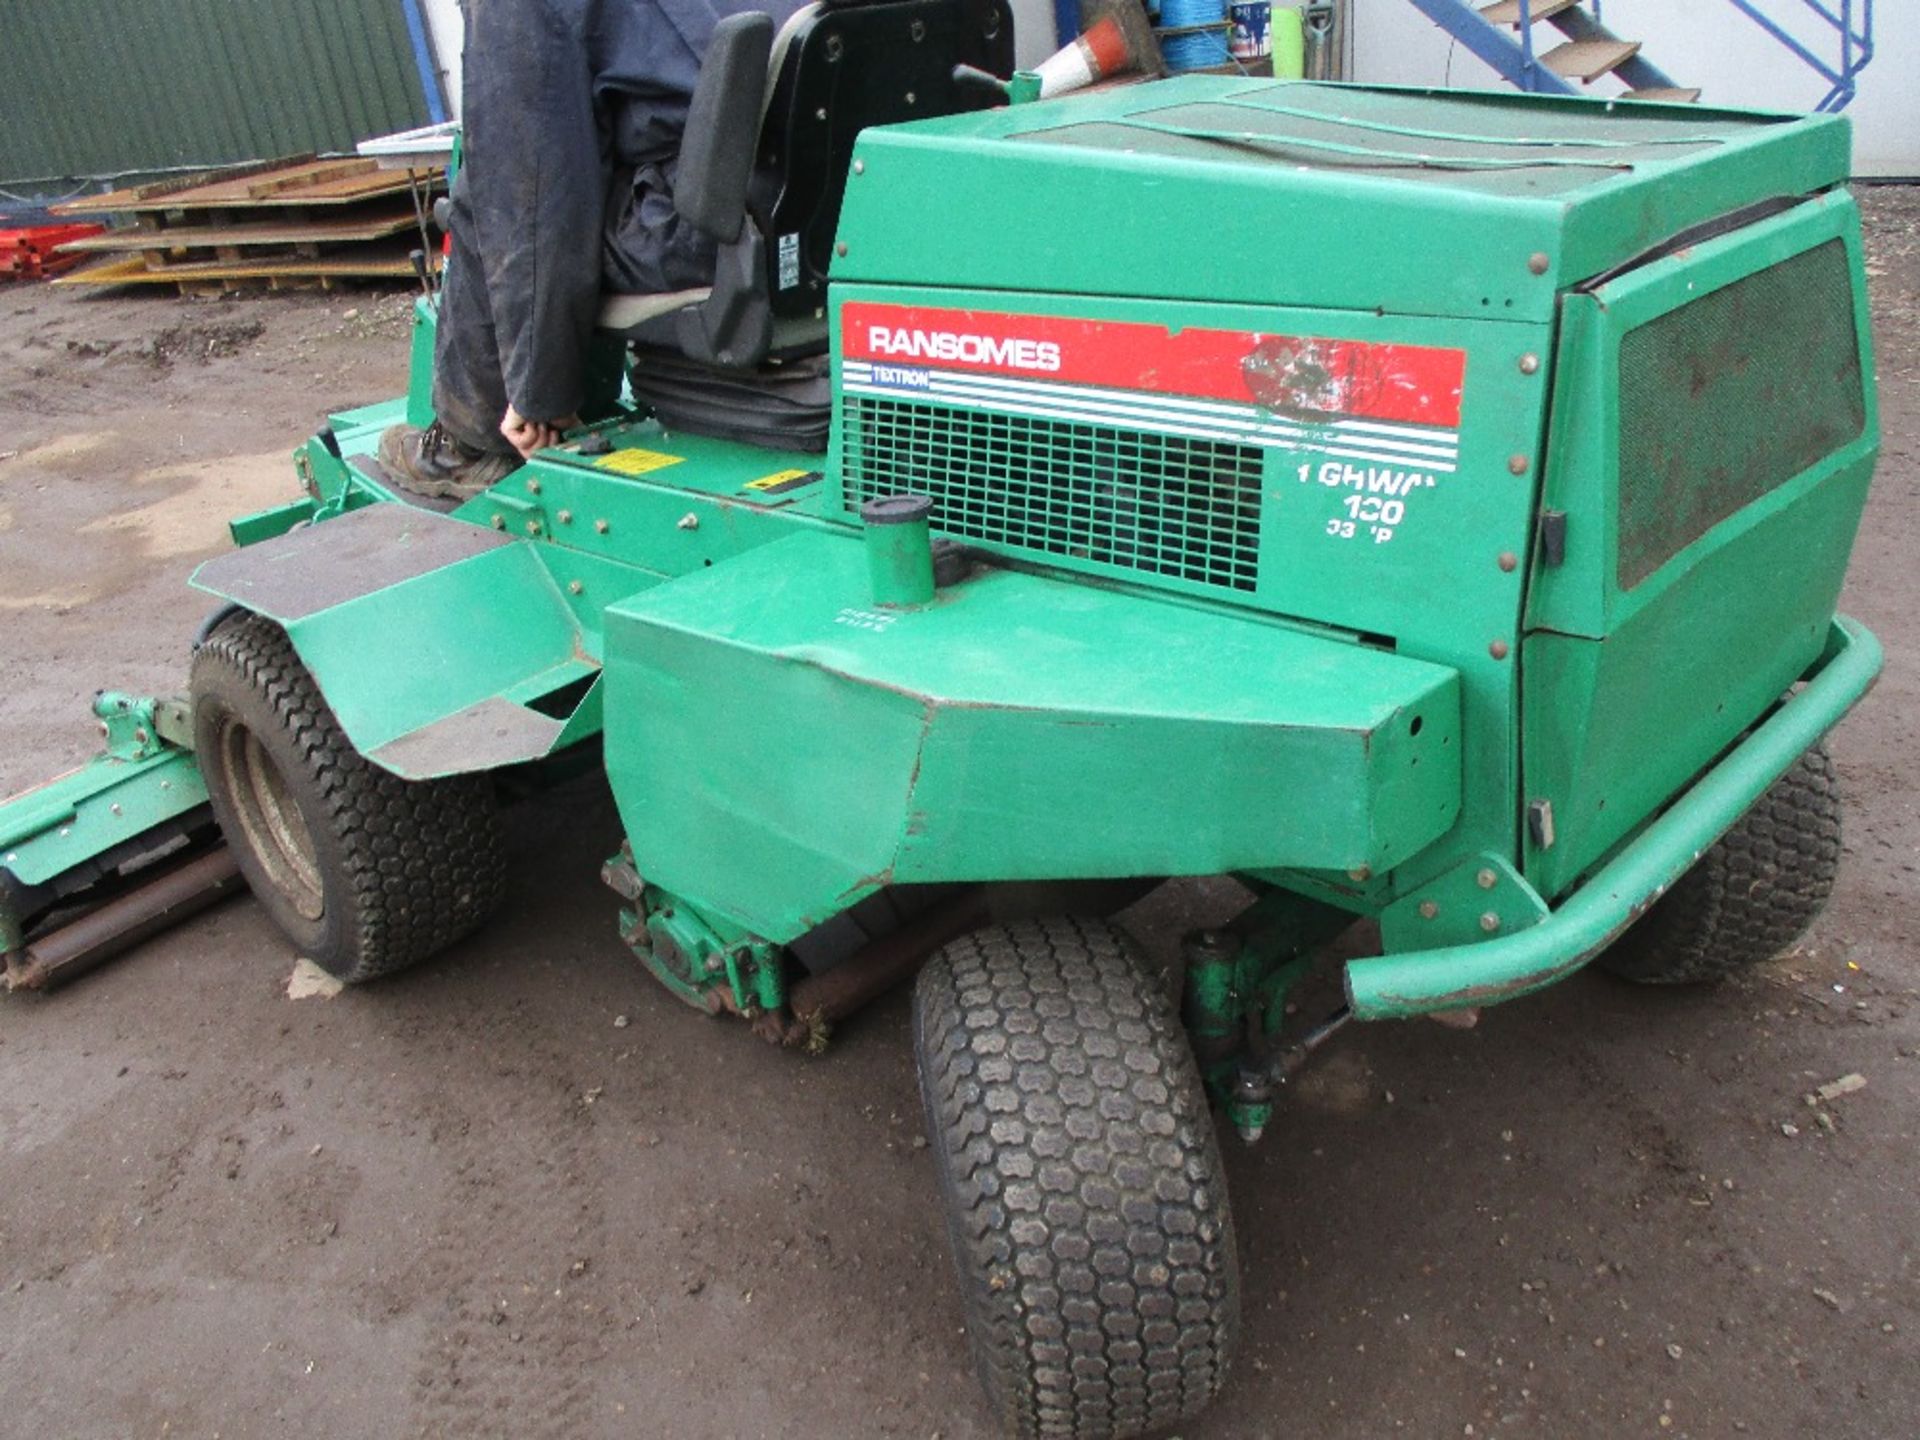 Ransomes 2130 triple mower - Image 5 of 7